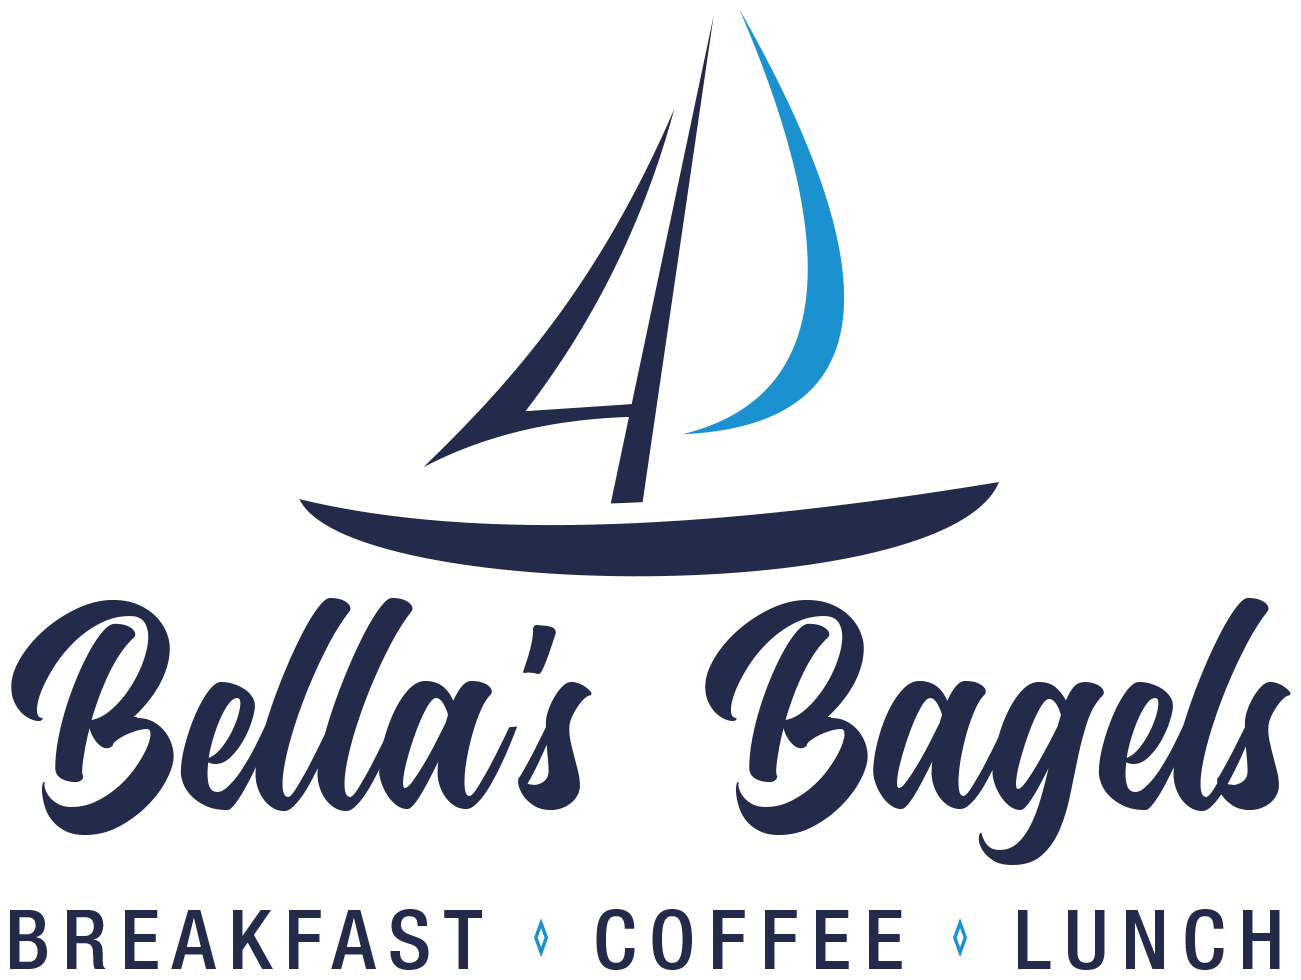 Bella's Bagels 1405 NW Central Ave